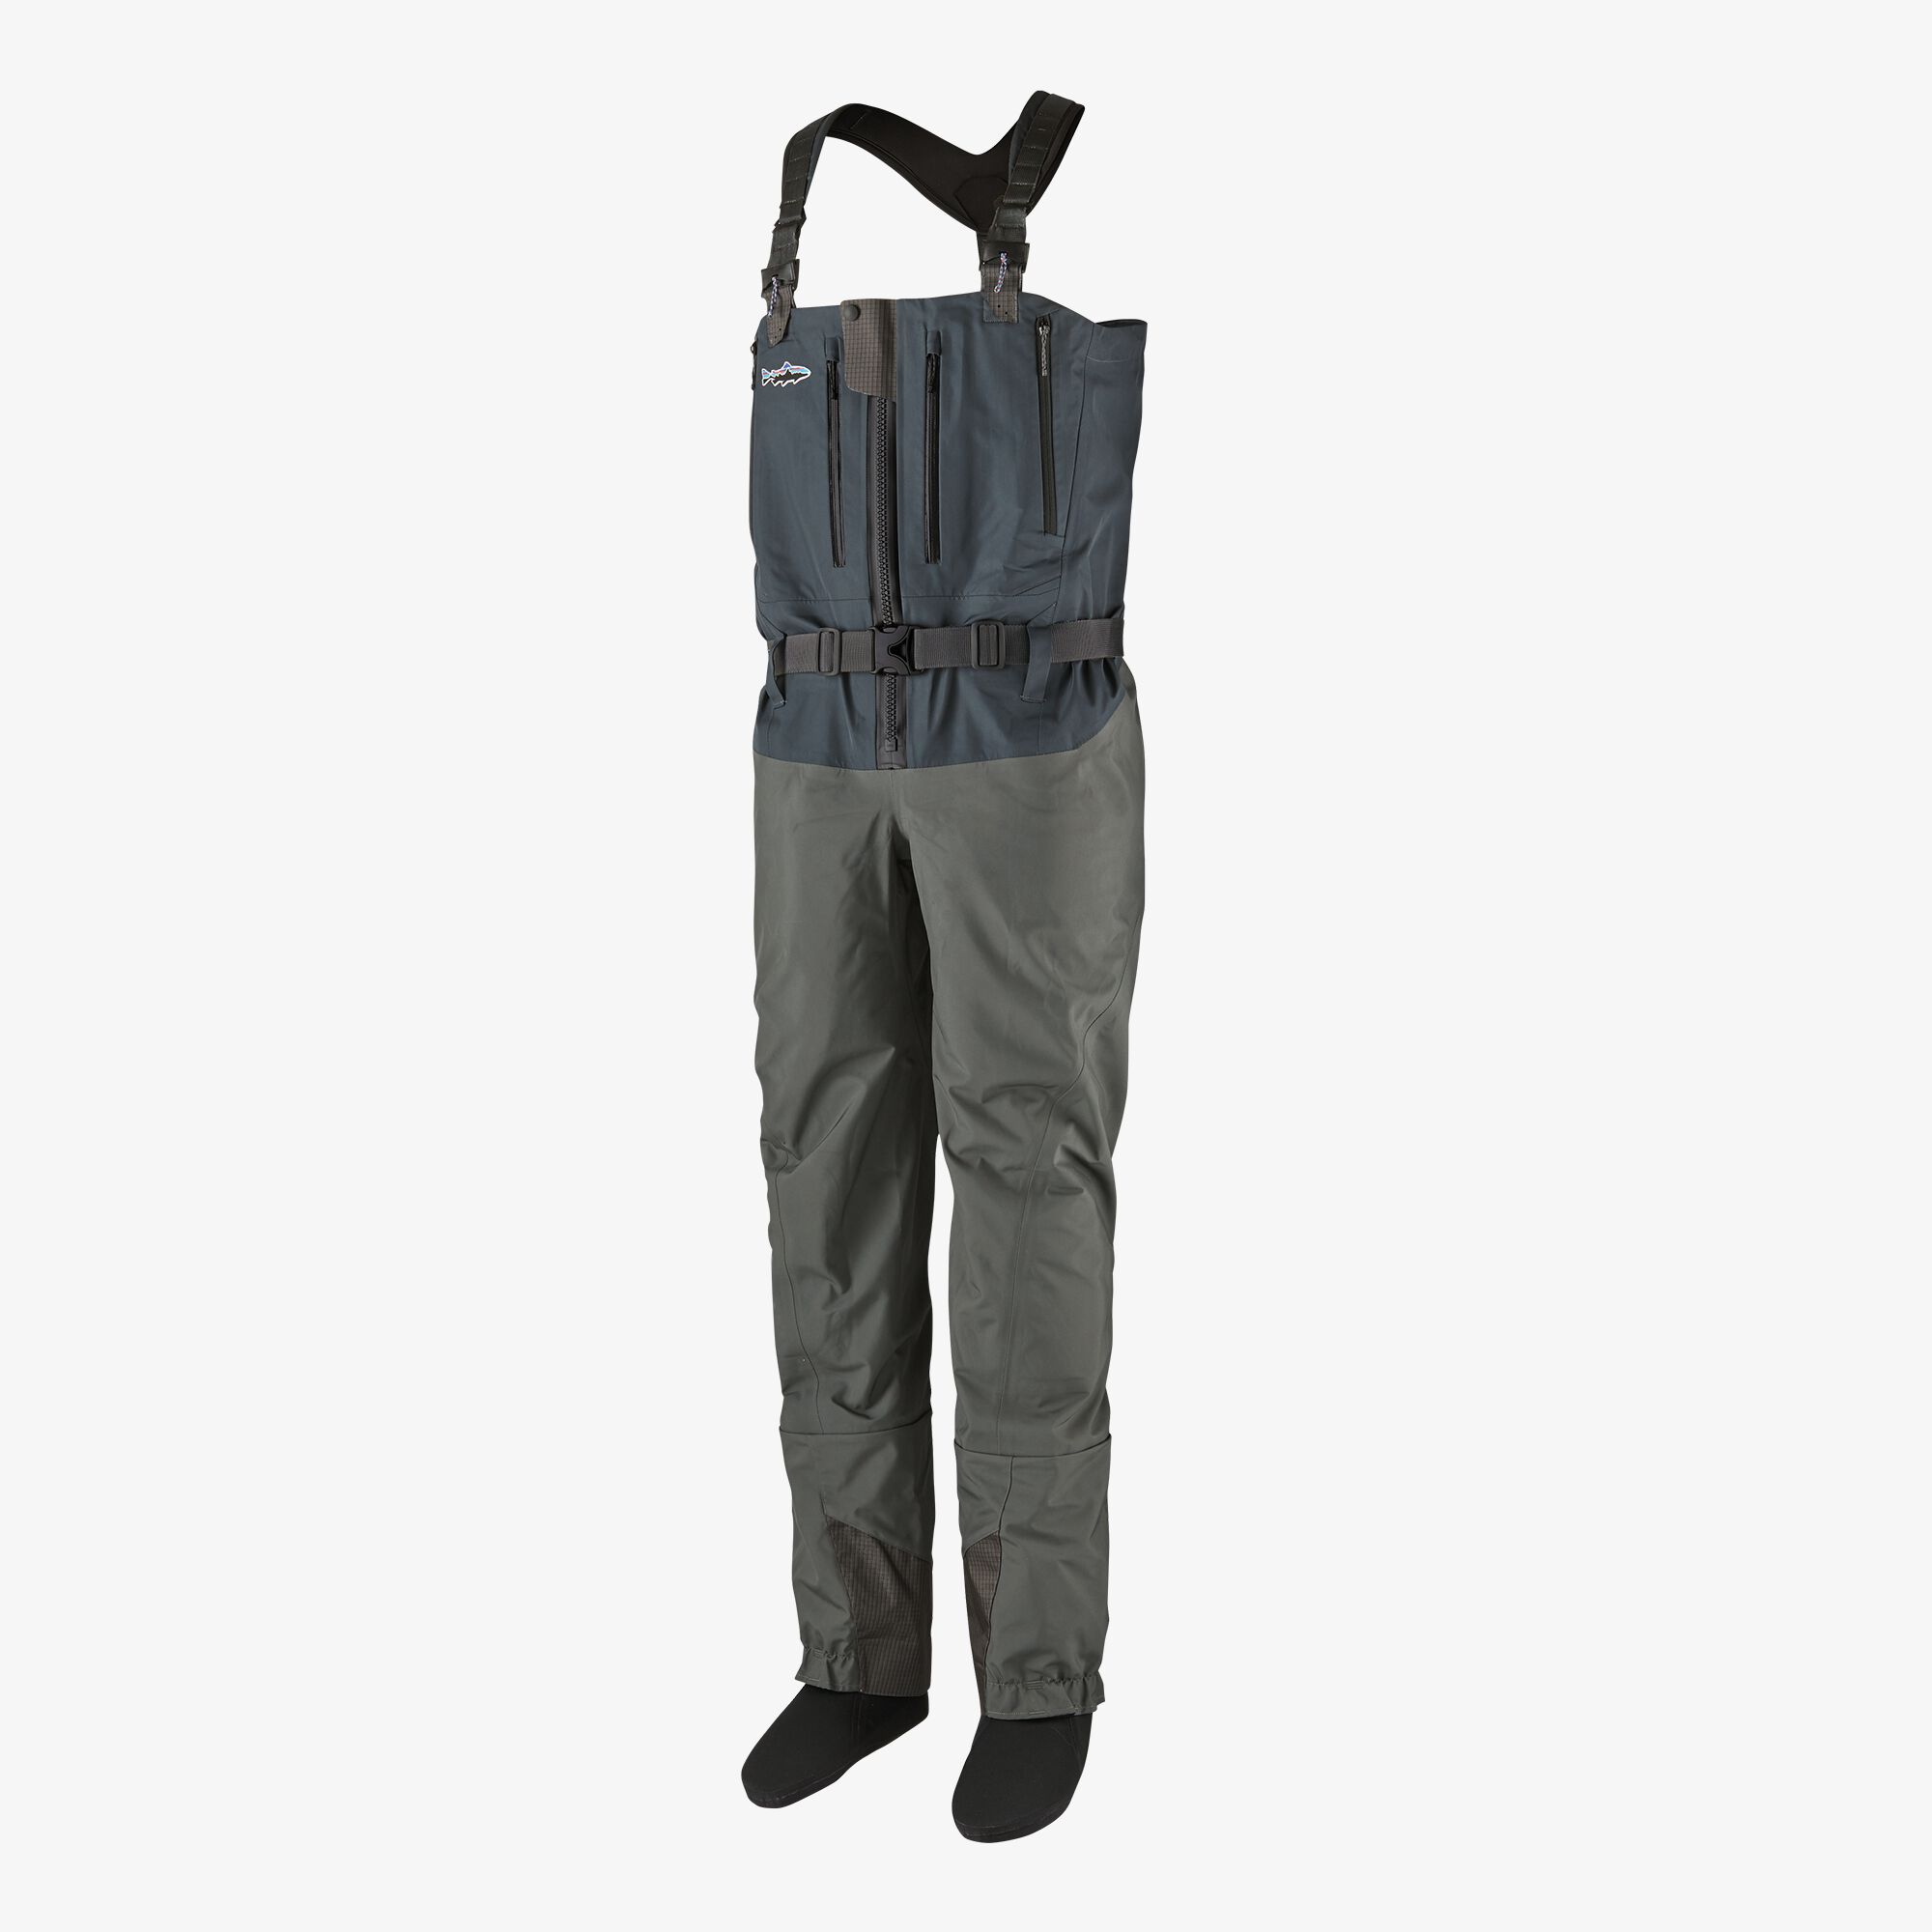 PATAGONIA SWIFTCURRENT EXPEDITION ZIP-FRONT WADER - FORGE GREY - XRM